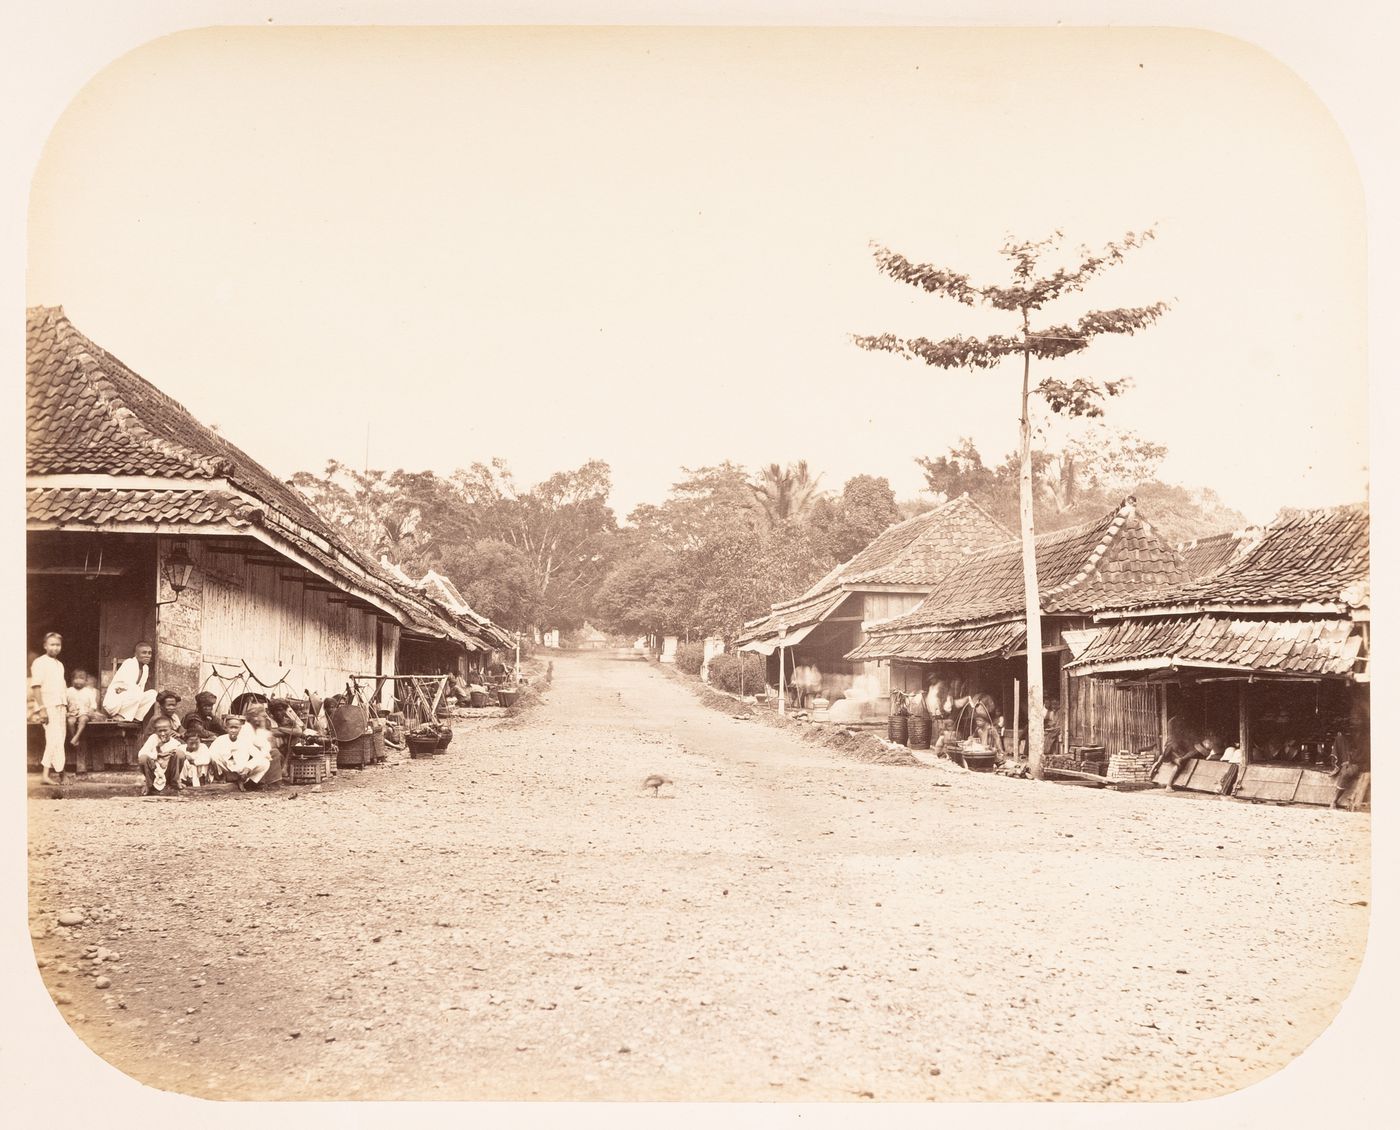 View of a street showing stores and people, Tjiandjur (now Cianjur), Dutch East Indies (now Indonesia)